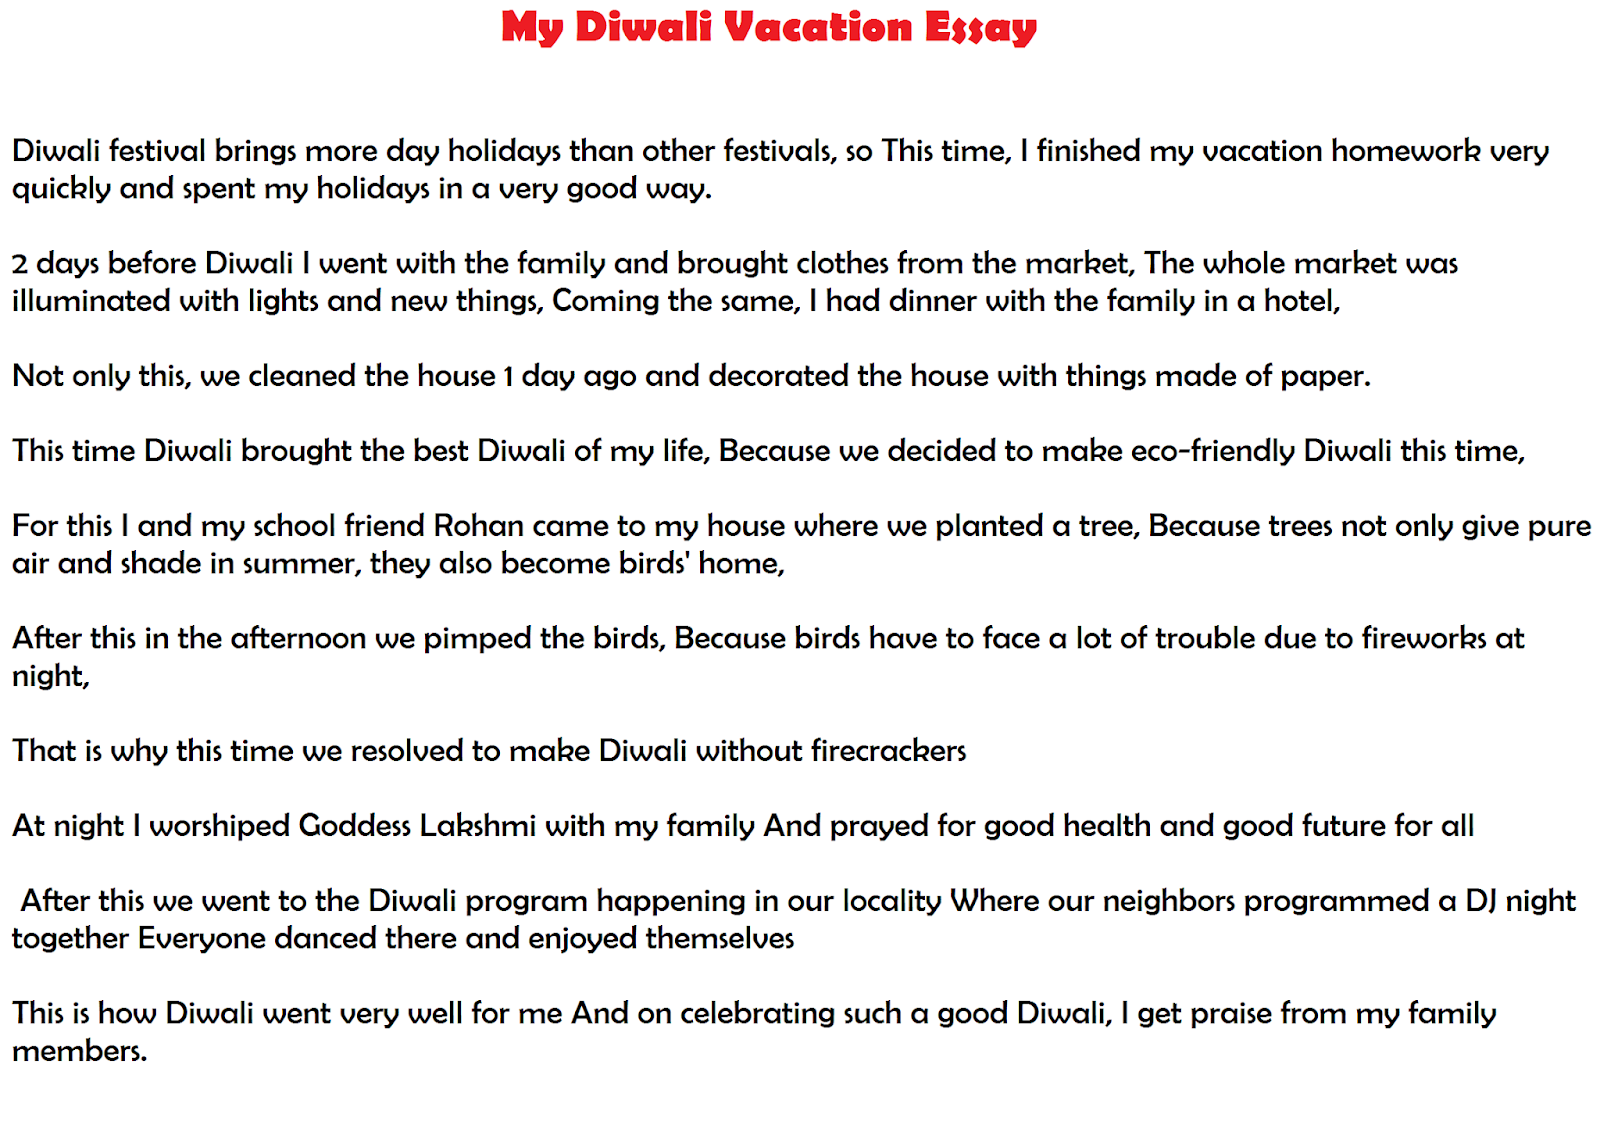 write an essay on how i spent my diwali vacation